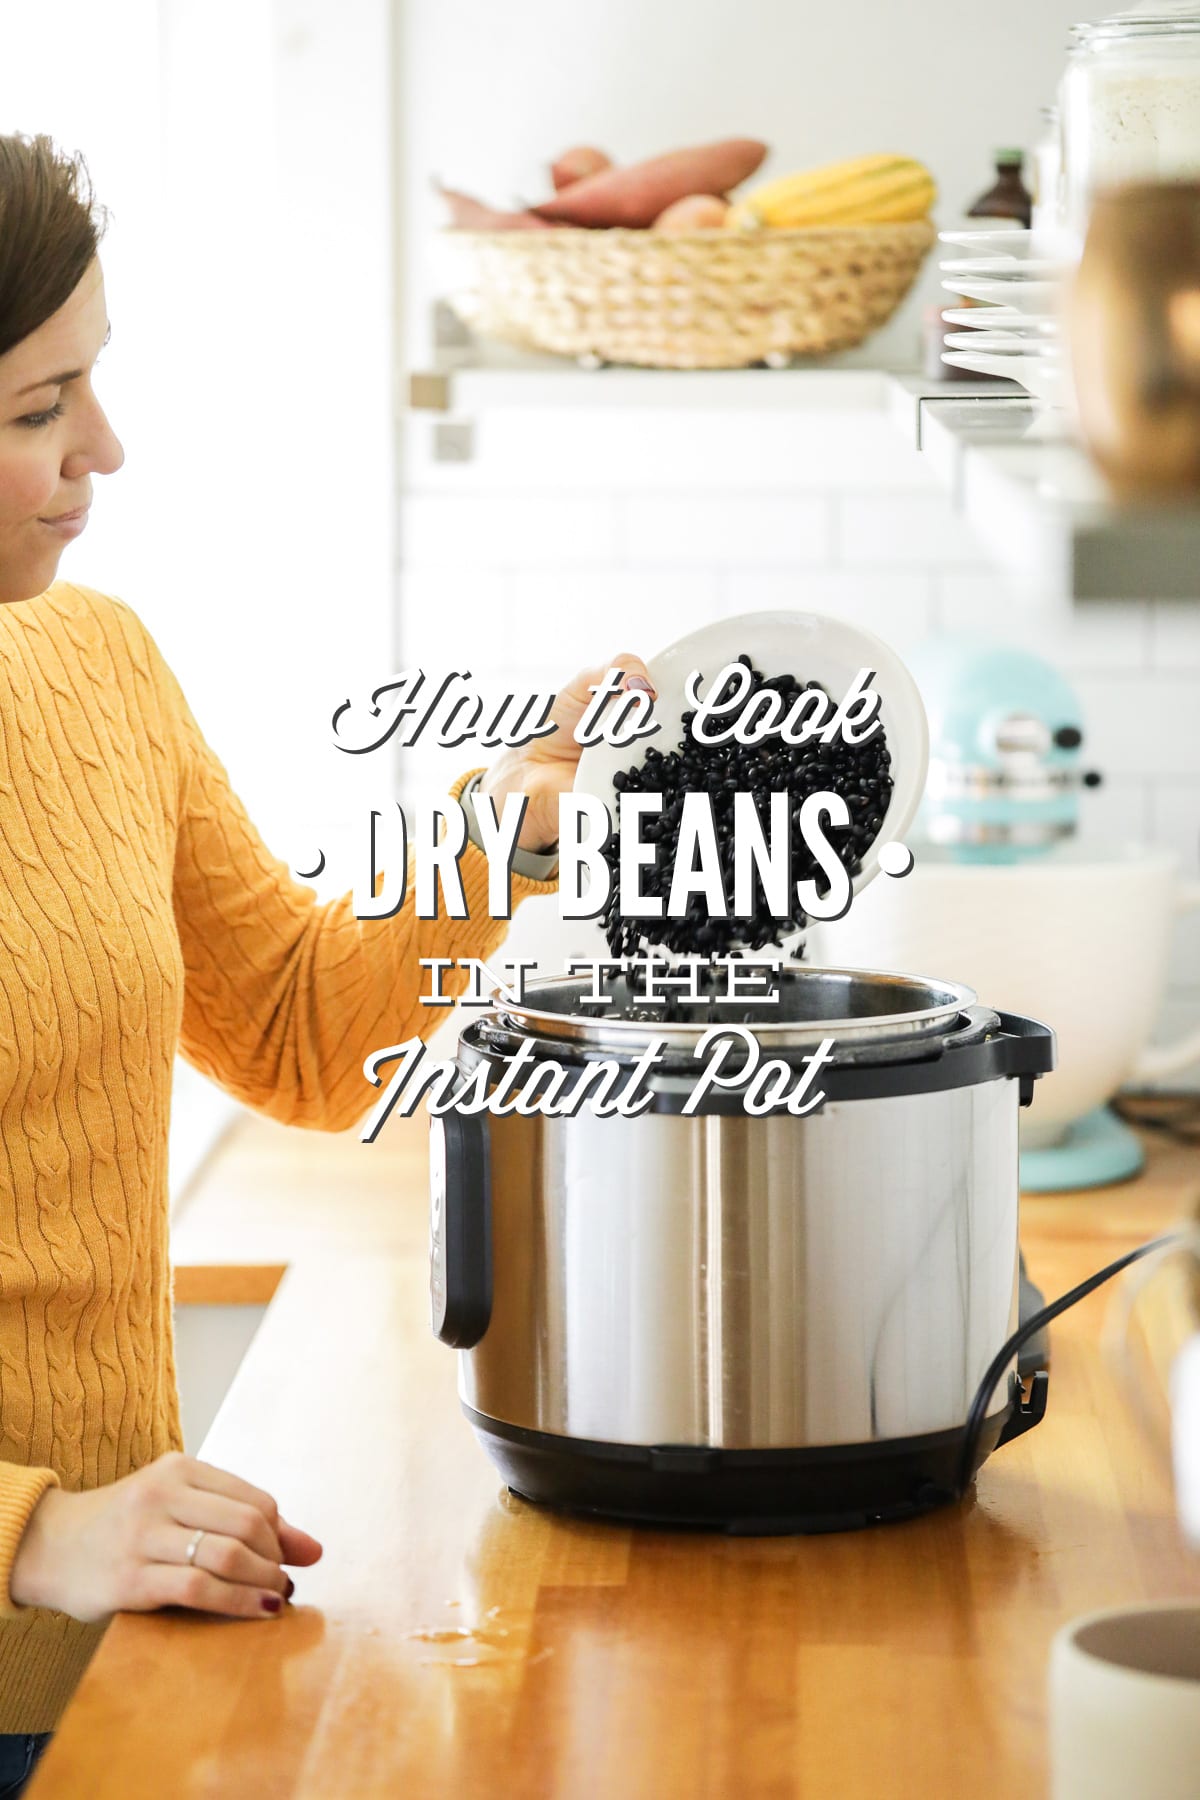 How To Cook Perfect Instant Pot Dry Beans (Any Kind)